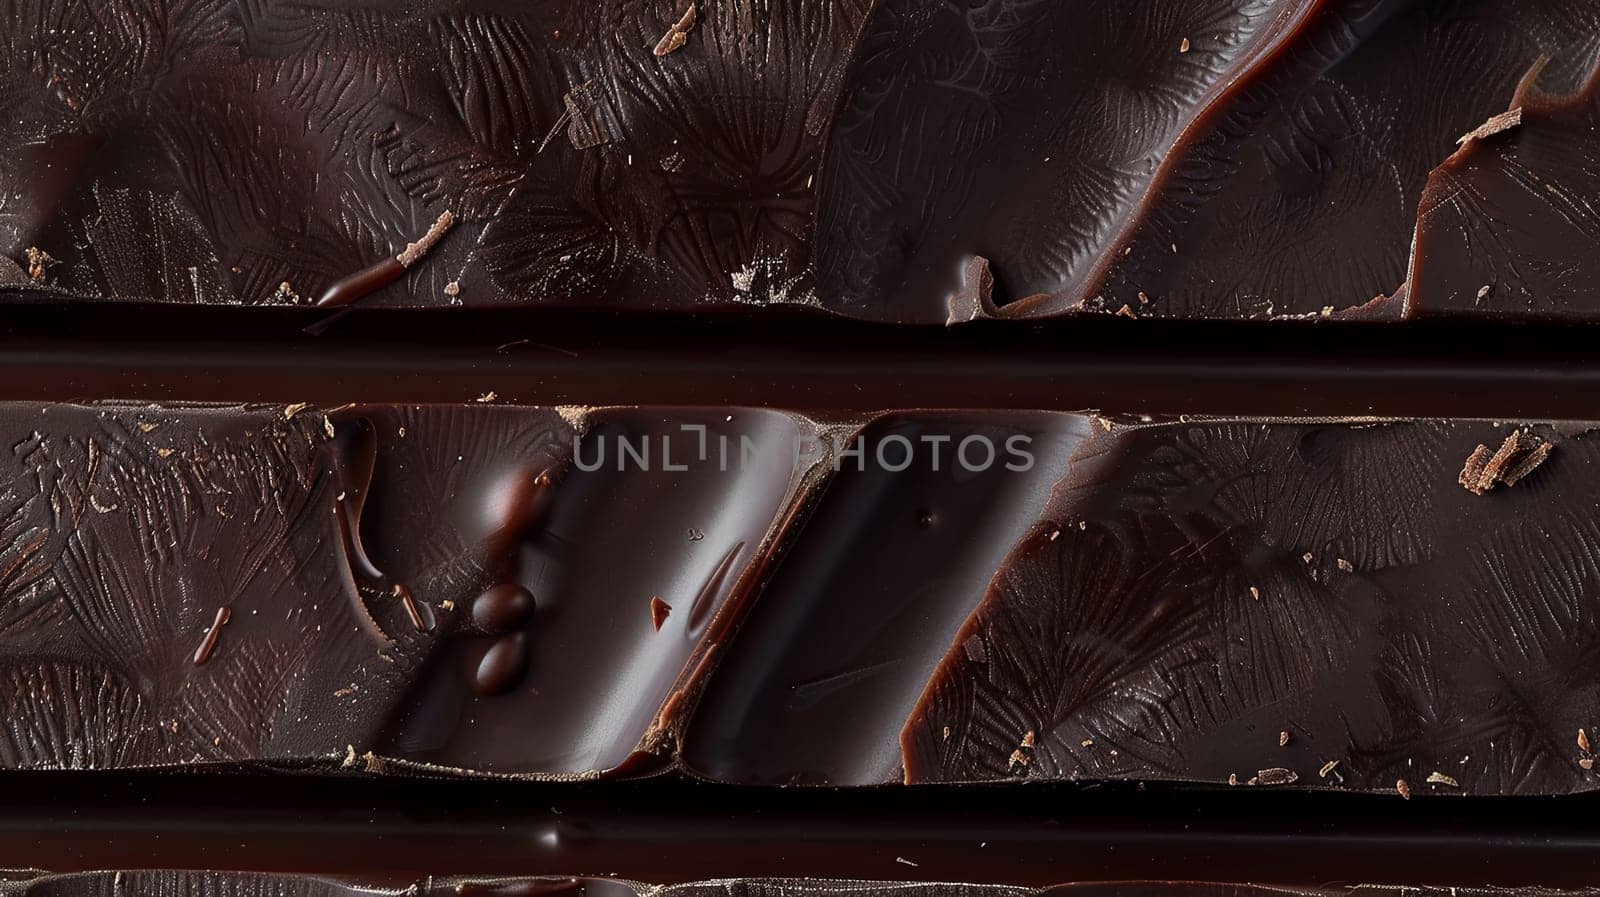 Close-up view of a dark chocolate bar with visible break lines, smooth texture, and rich color.